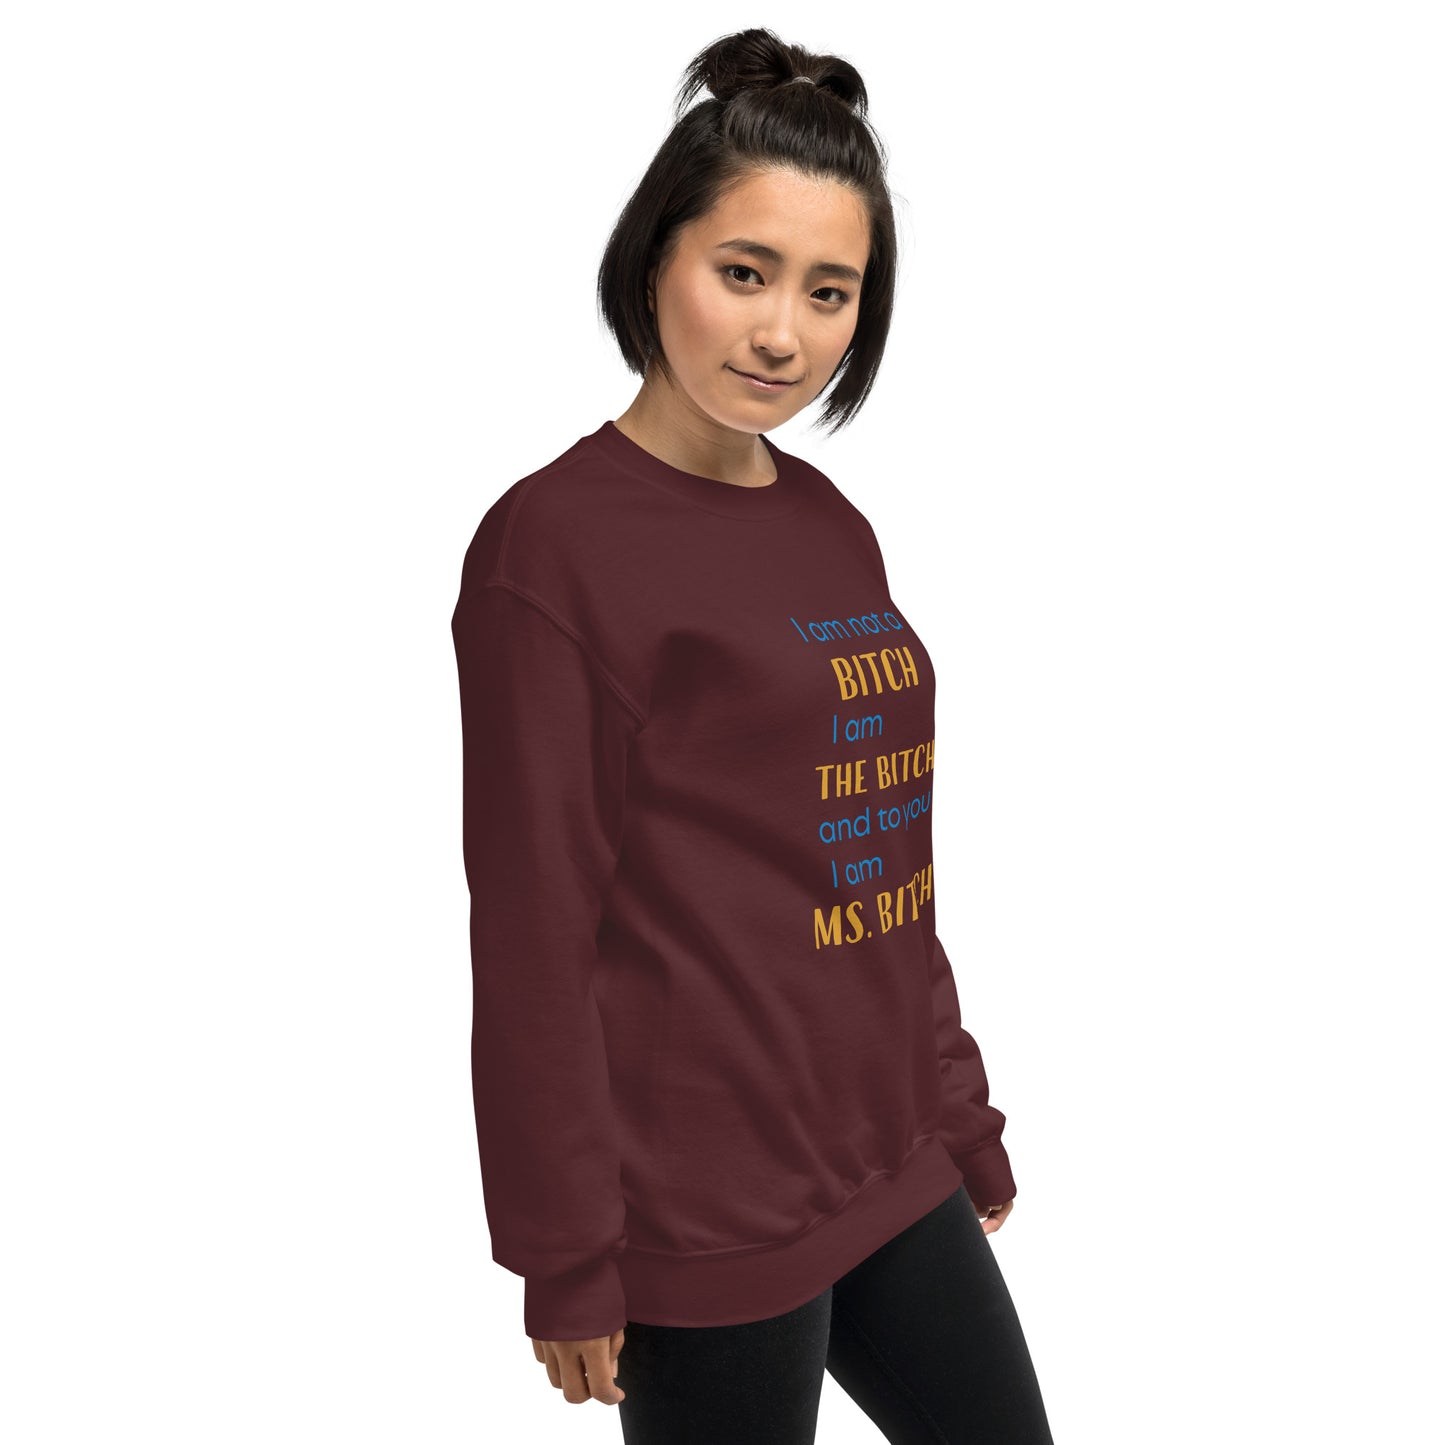 Women with maroon sweatshirt with the text "to you I'm MS bitch"